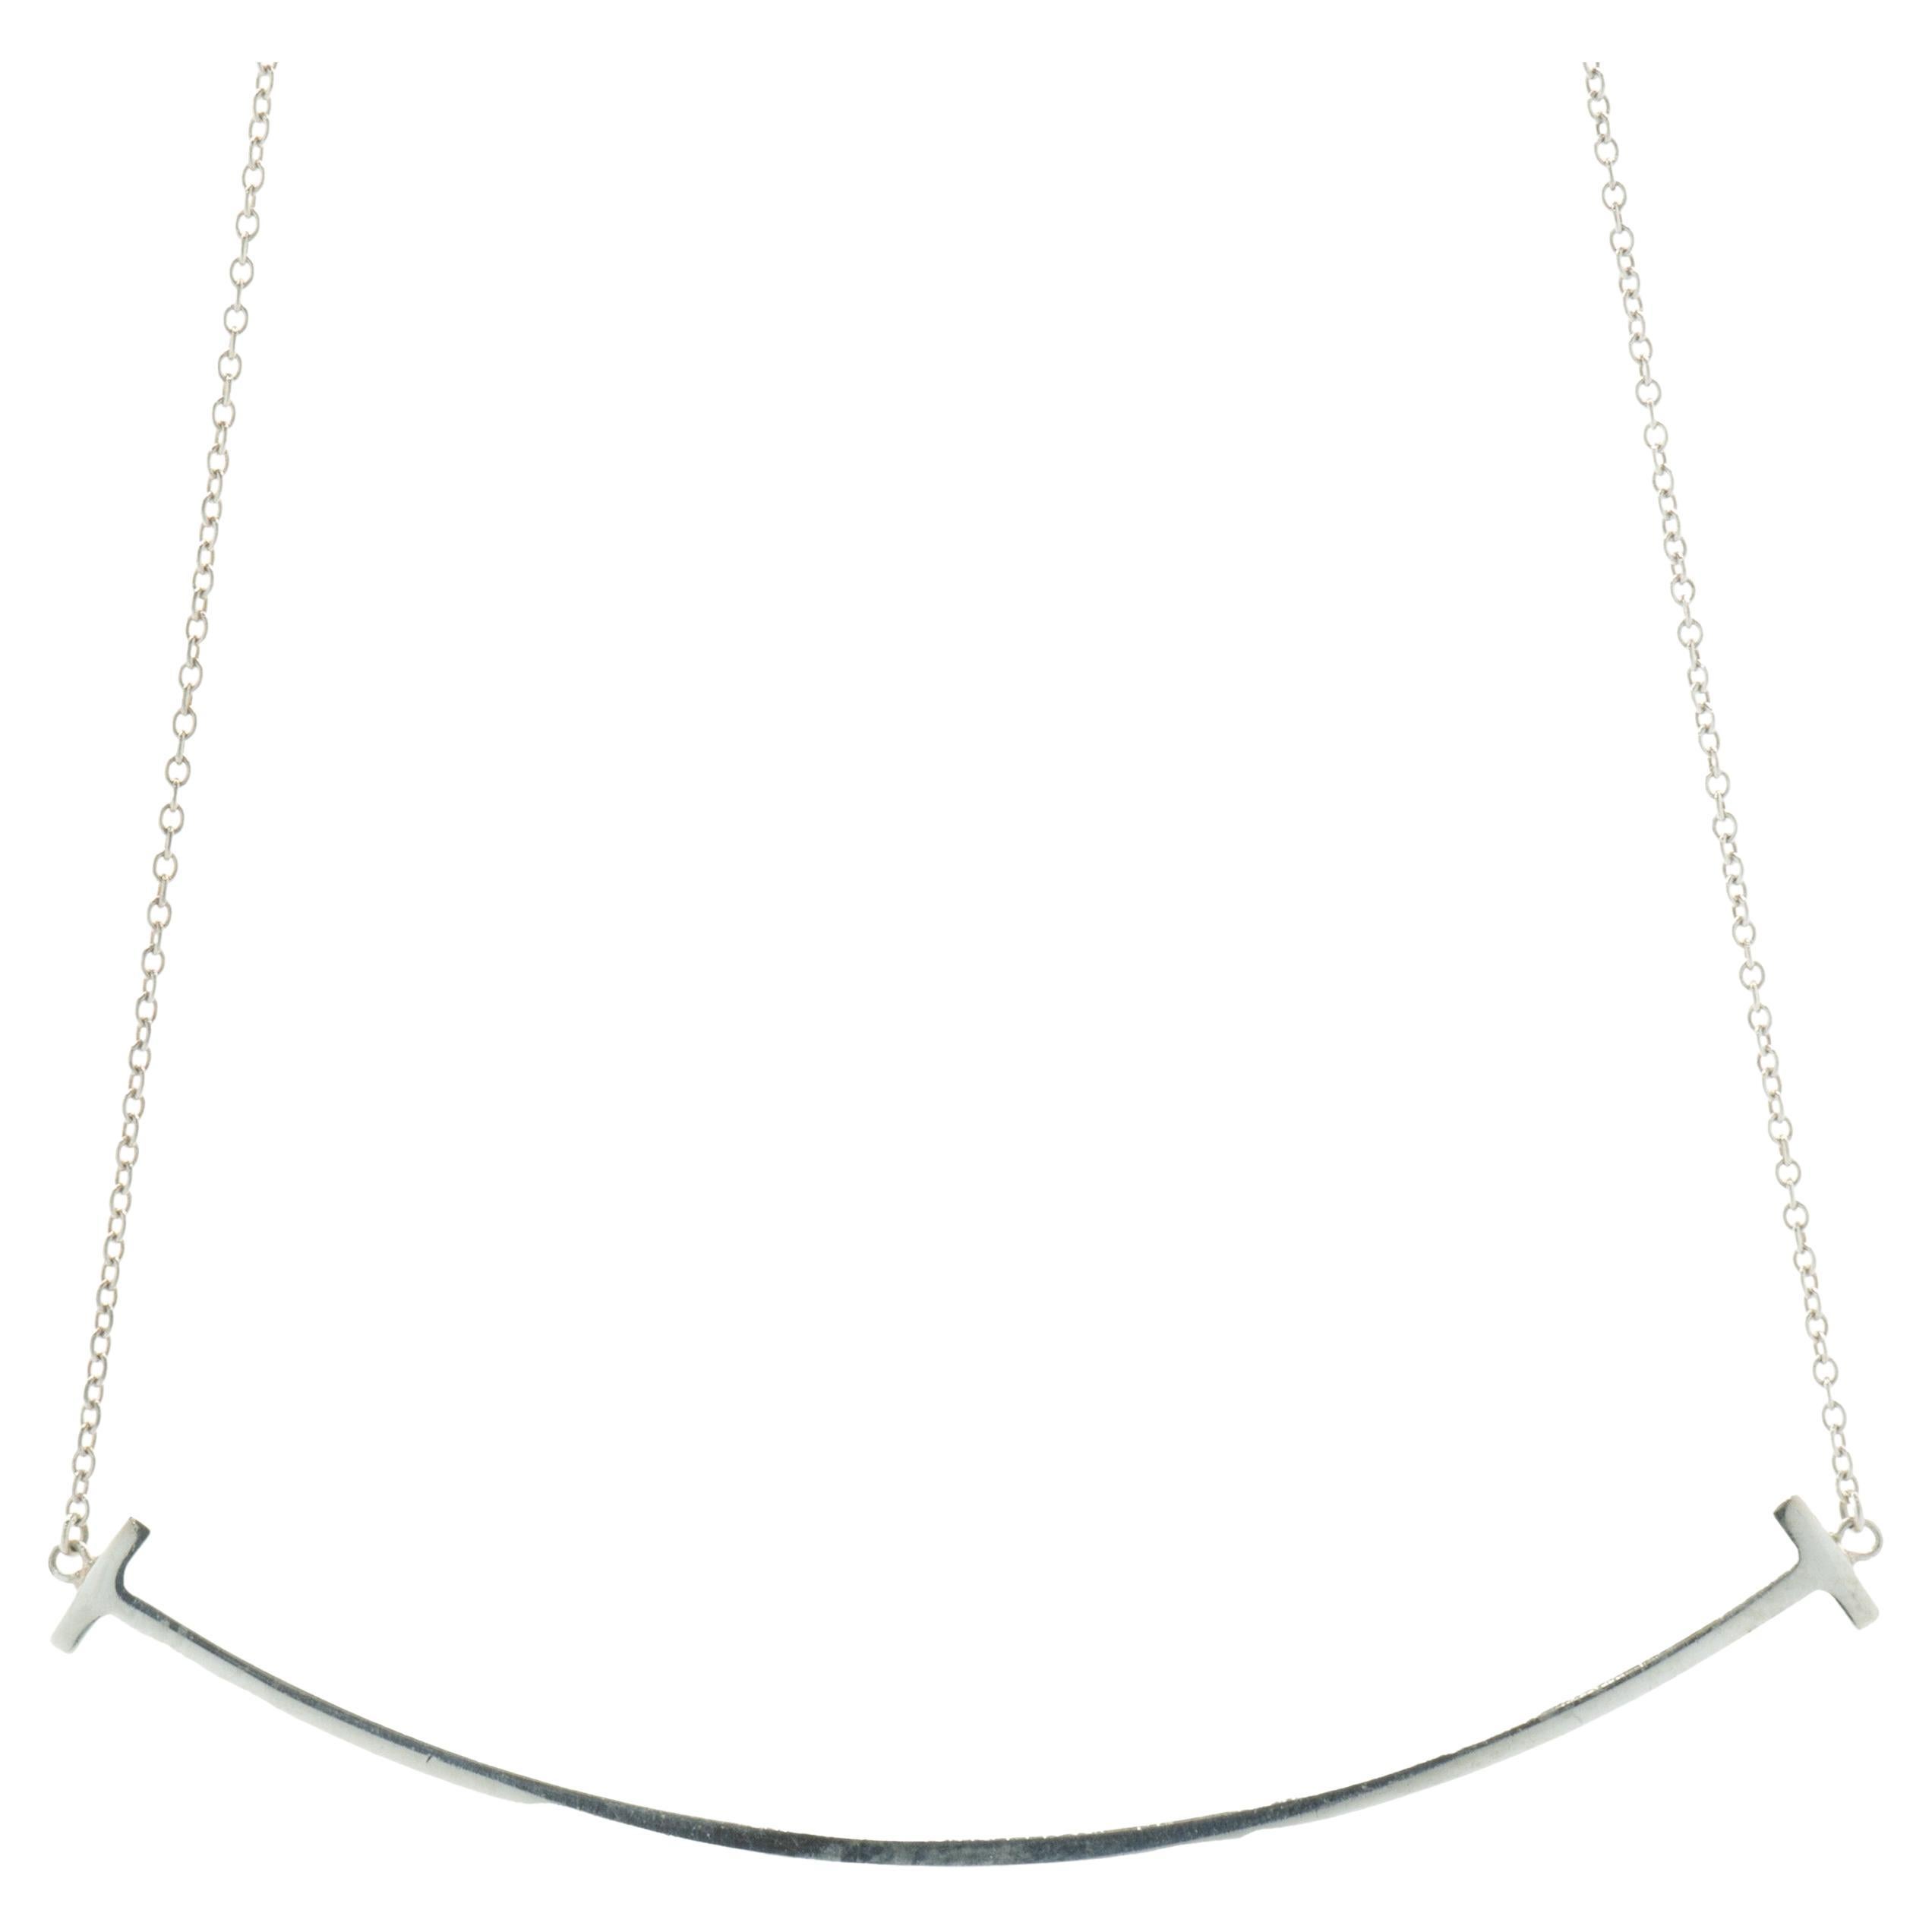 Tiffany & Co. Sterling Silver Smile Necklace